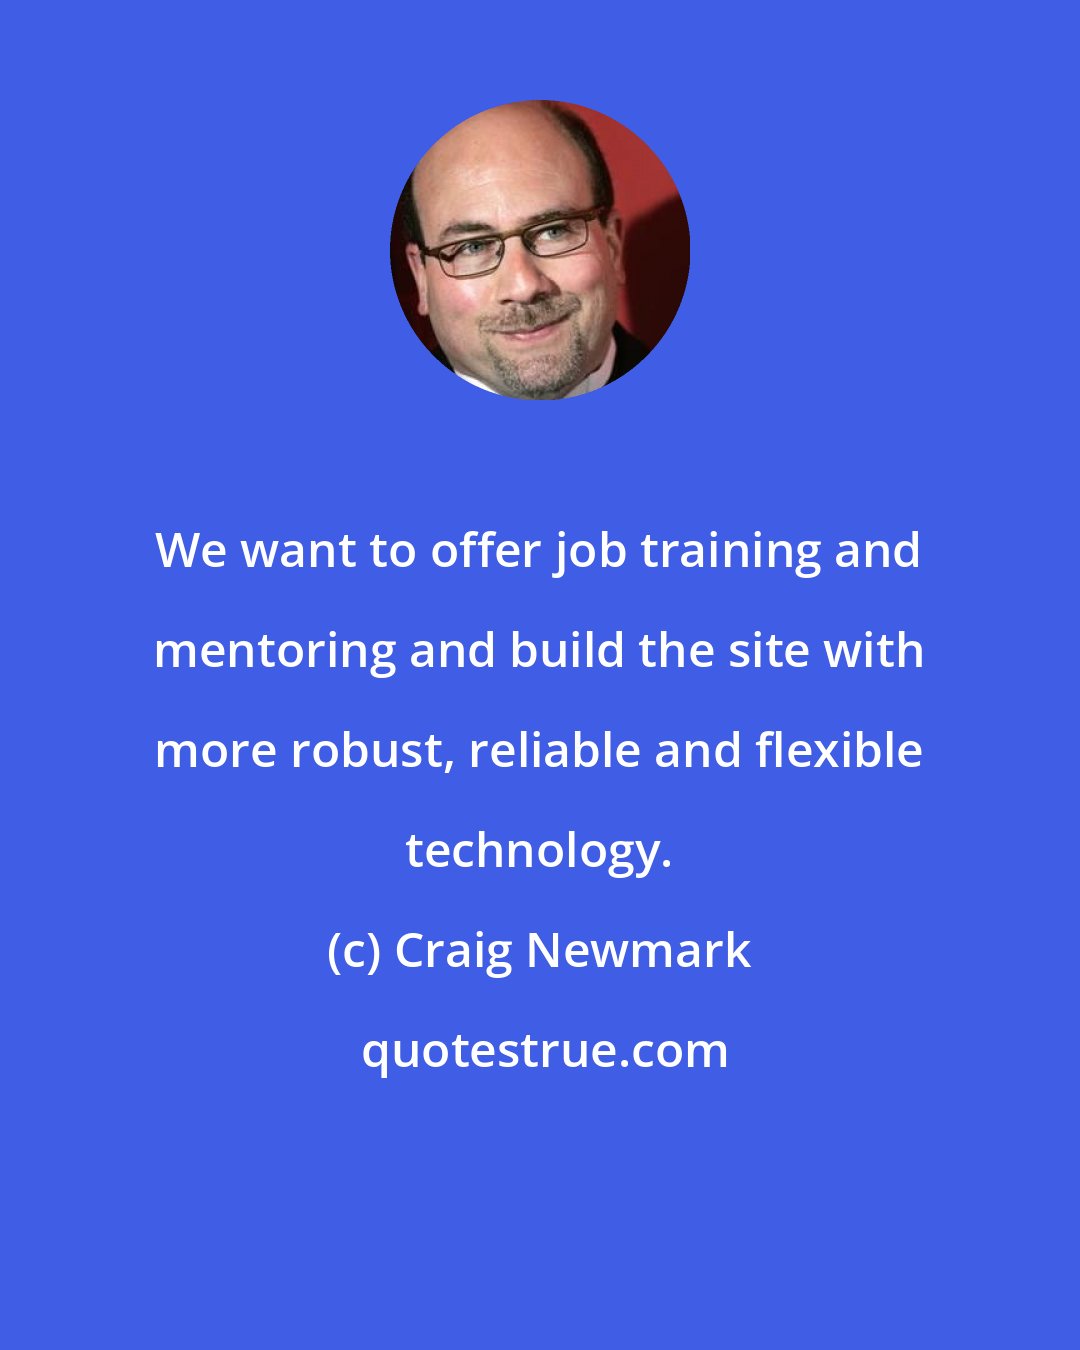 Craig Newmark: We want to offer job training and mentoring and build the site with more robust, reliable and flexible technology.